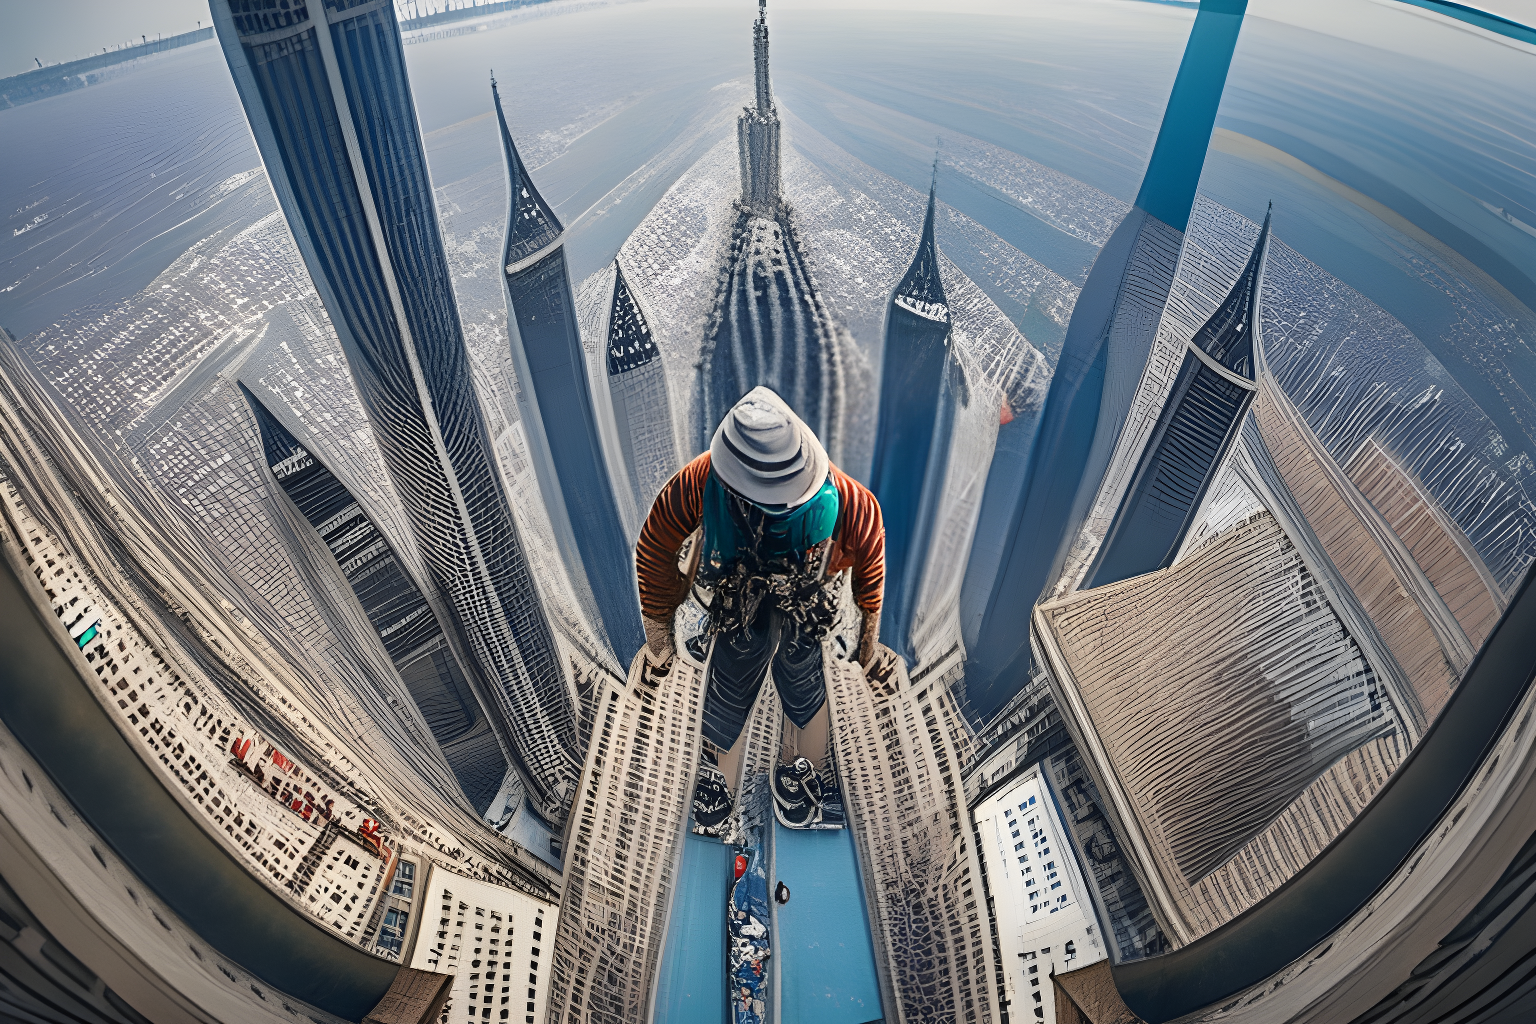 Scaling the tallest building in the world